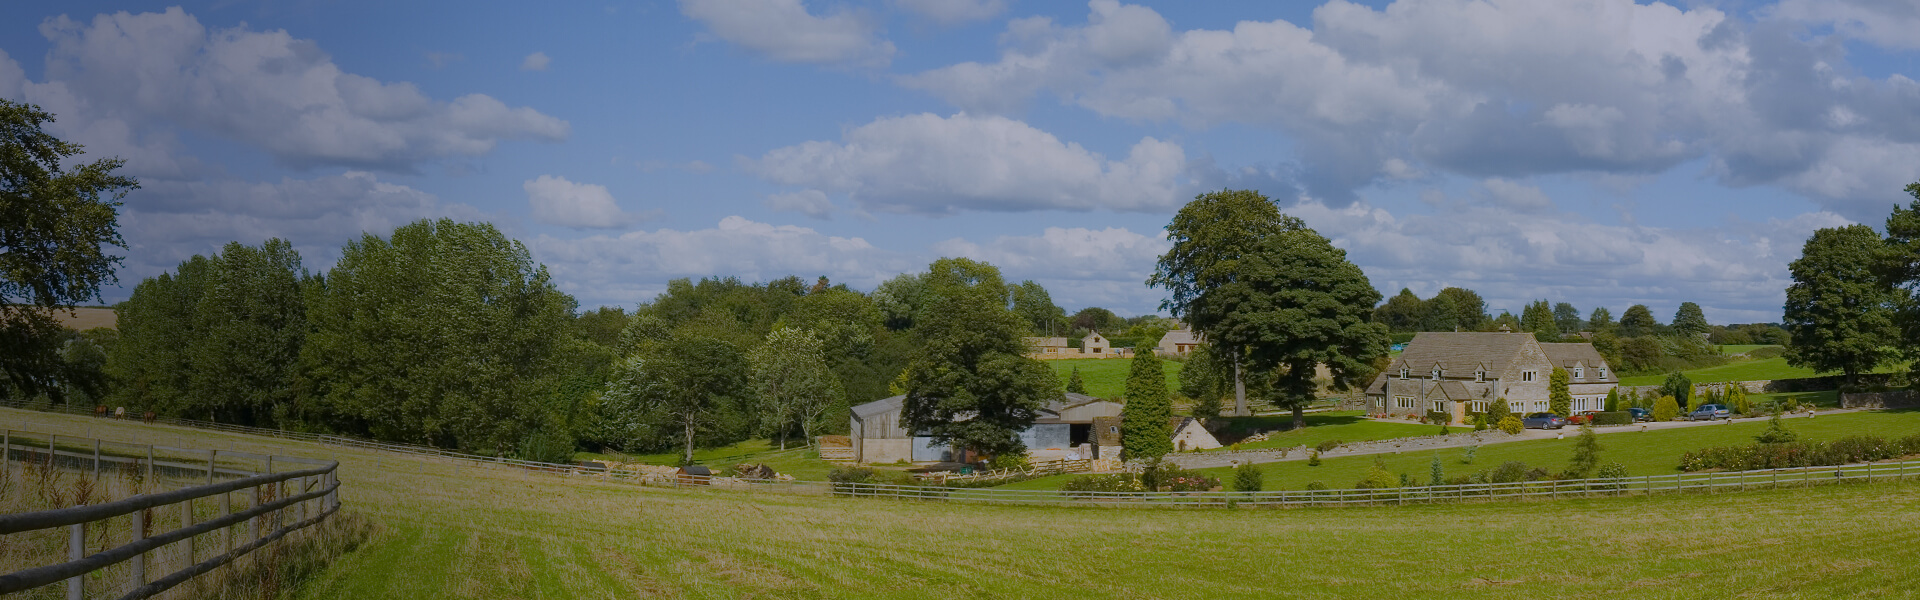 Image of farm house, and buildings surrounded by rolling hills of fields